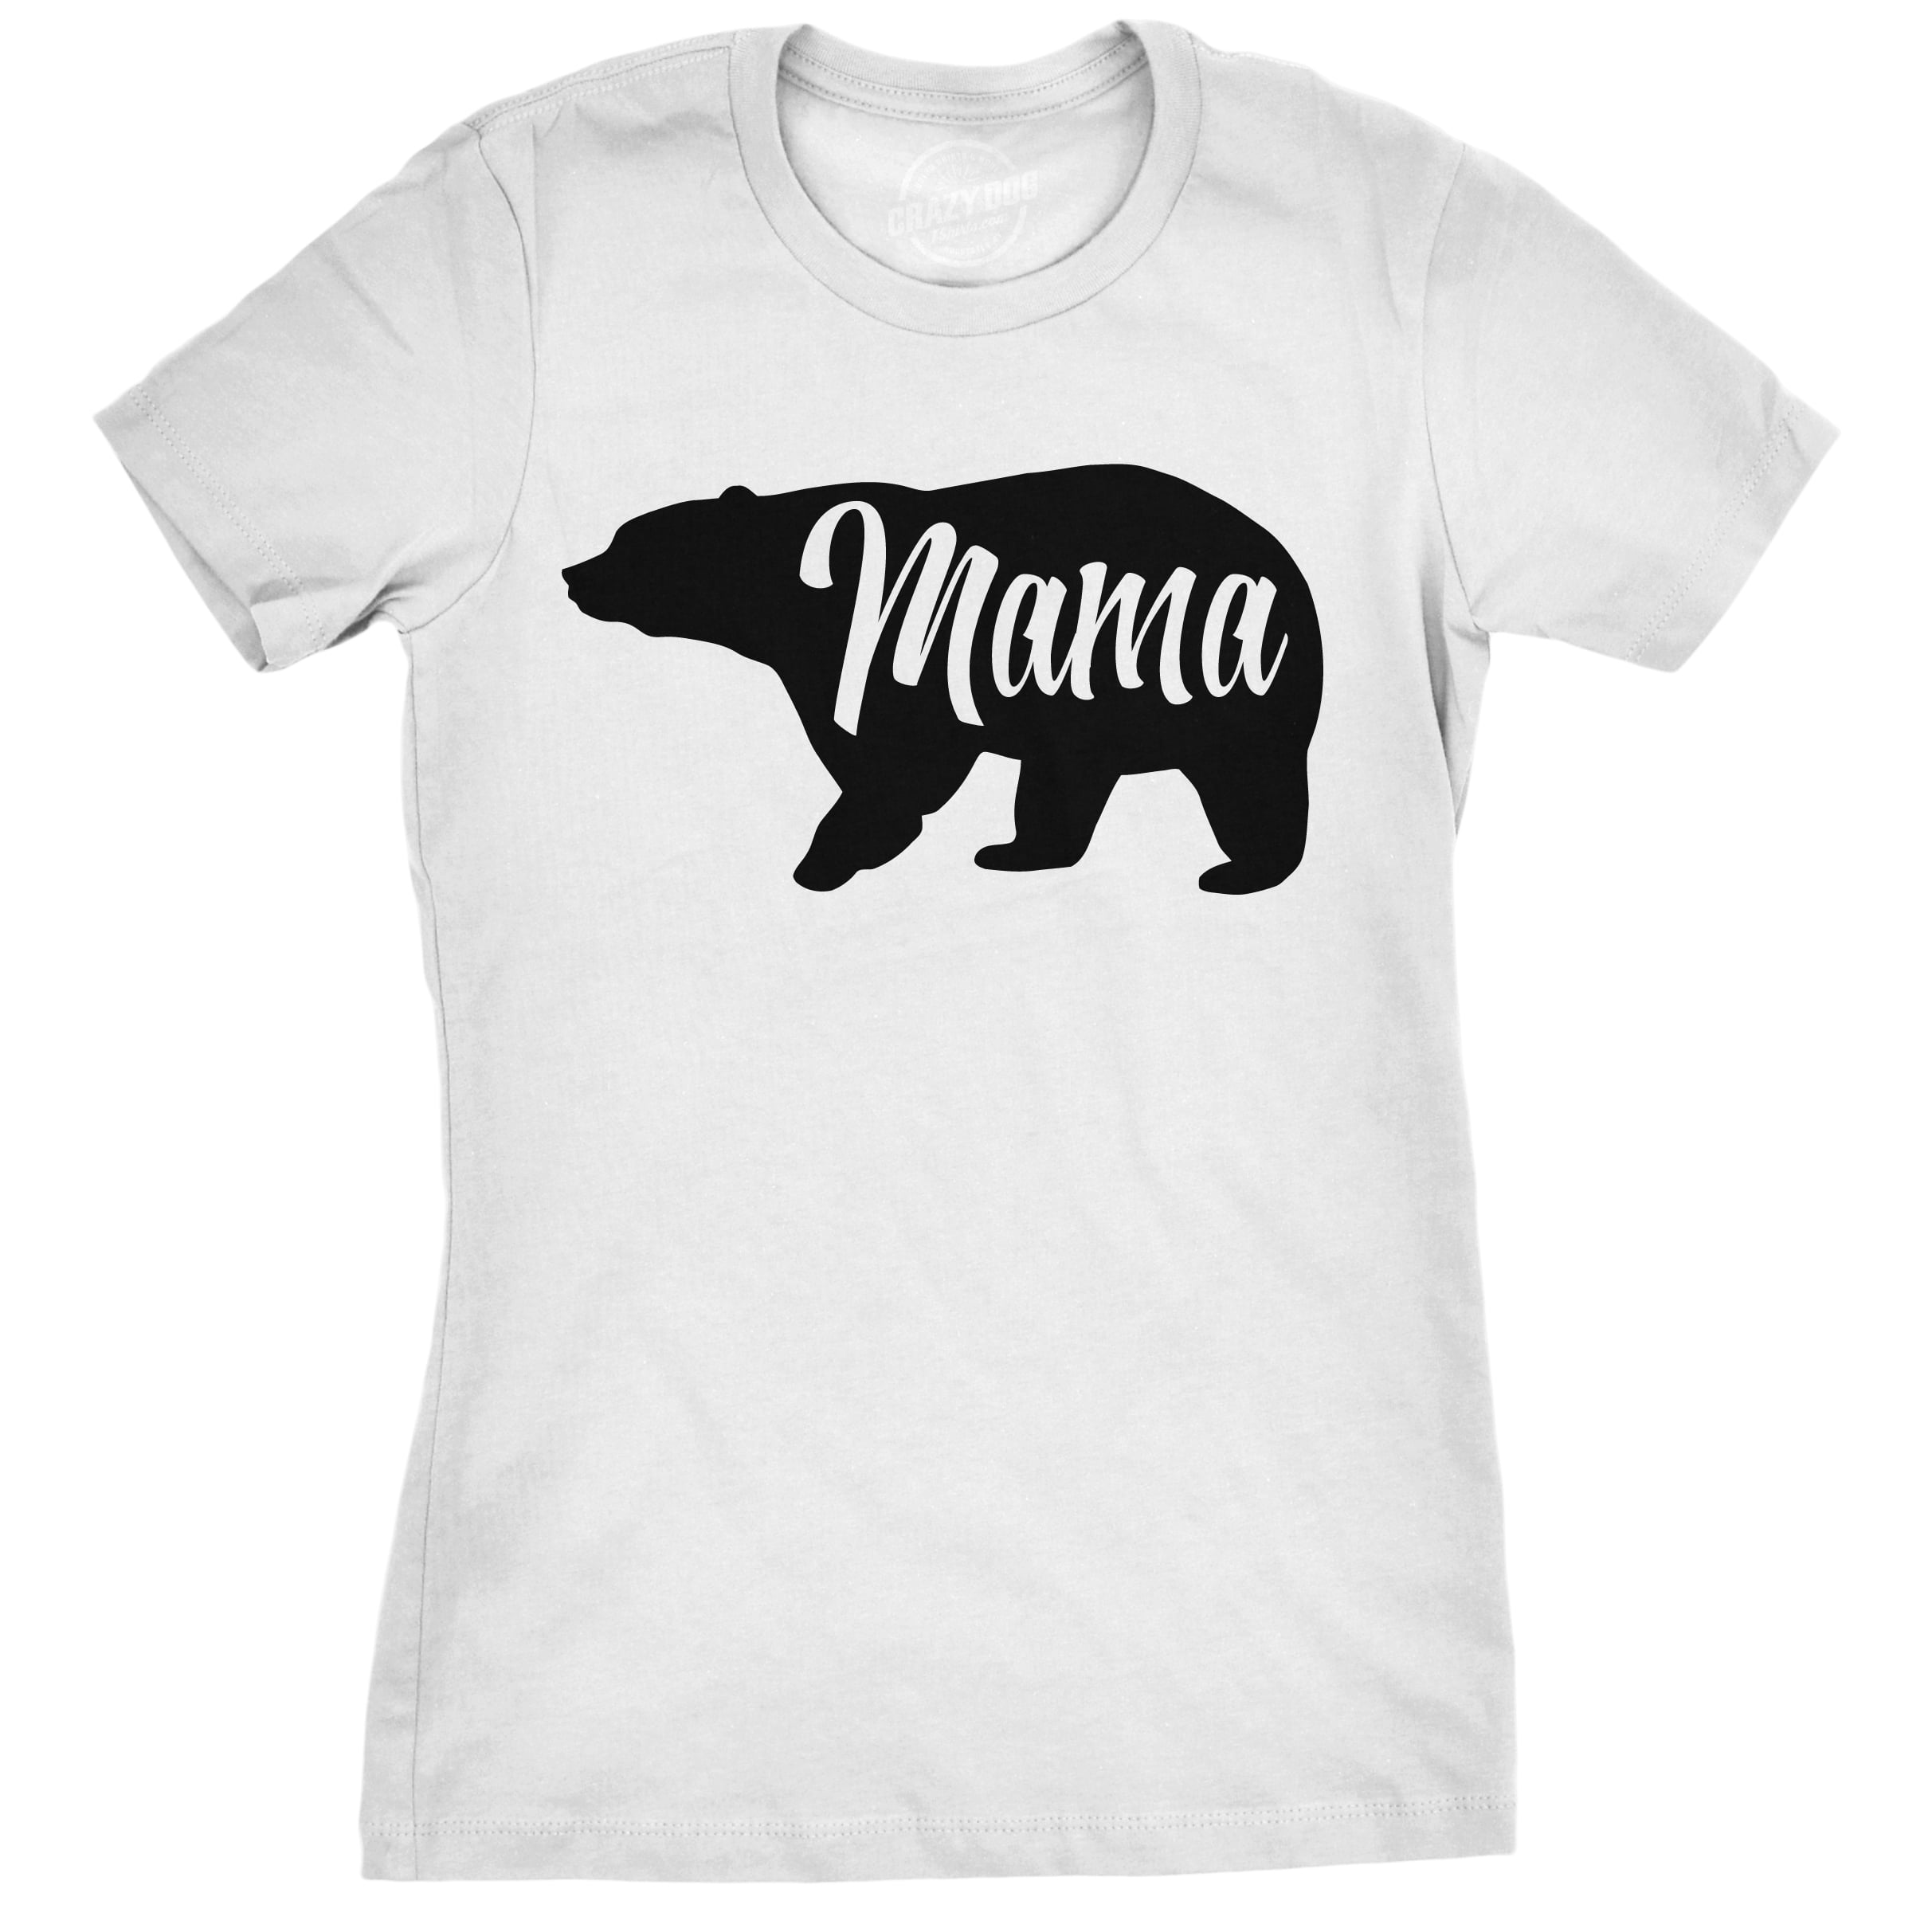 Womens Mama Bear T shirt Cute Funny Best Mom of Boys Girls Cool Mothers Day...